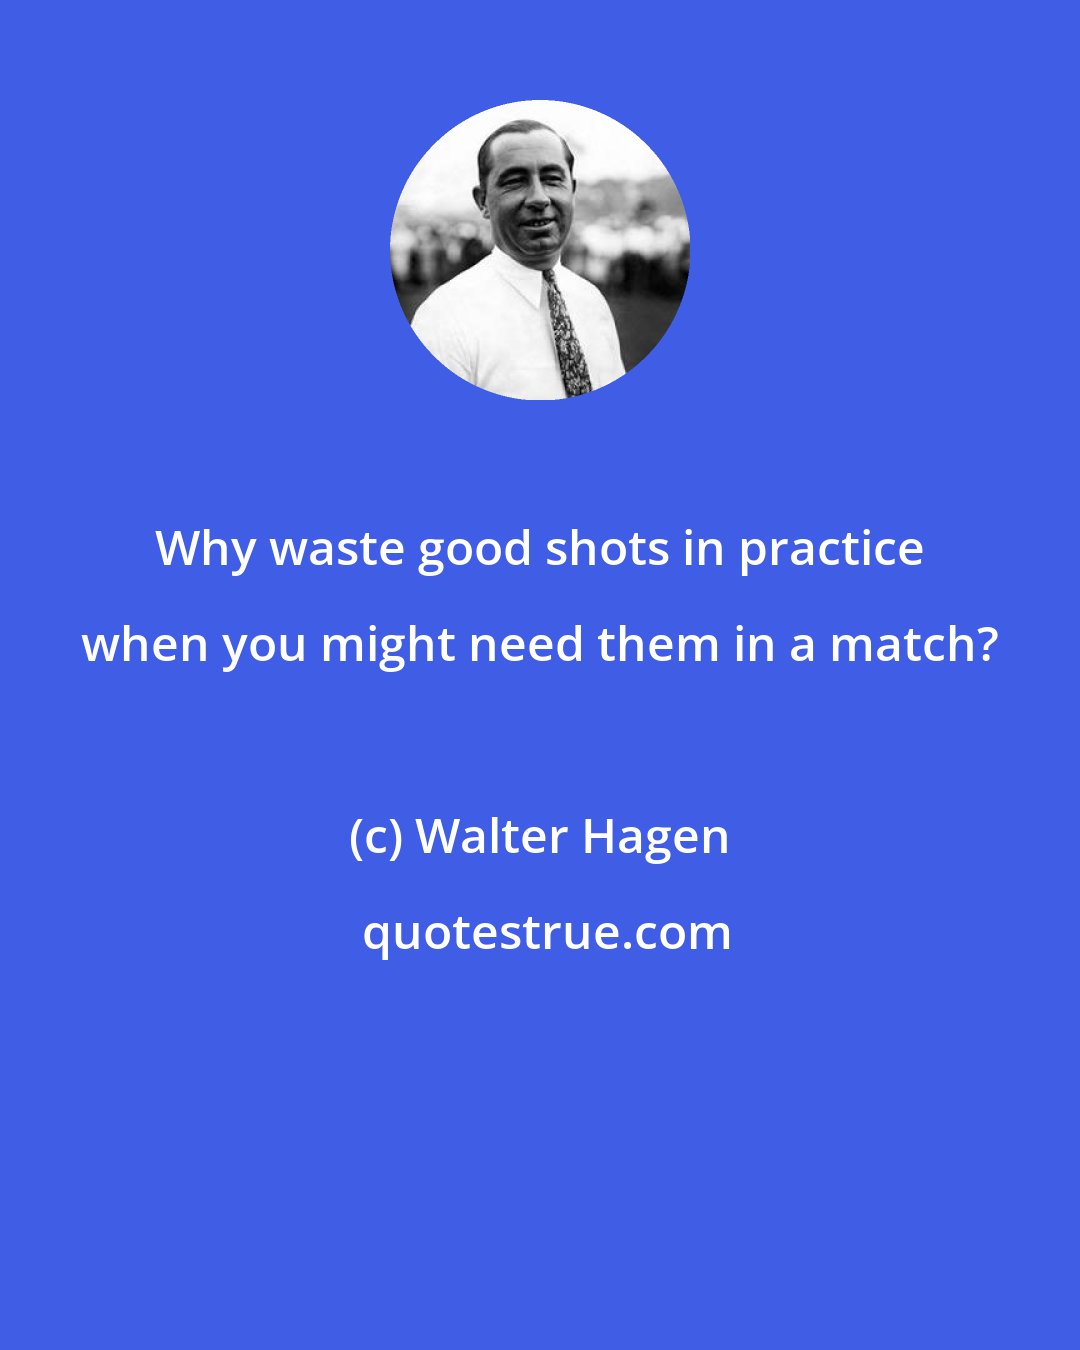 Walter Hagen: Why waste good shots in practice when you might need them in a match?